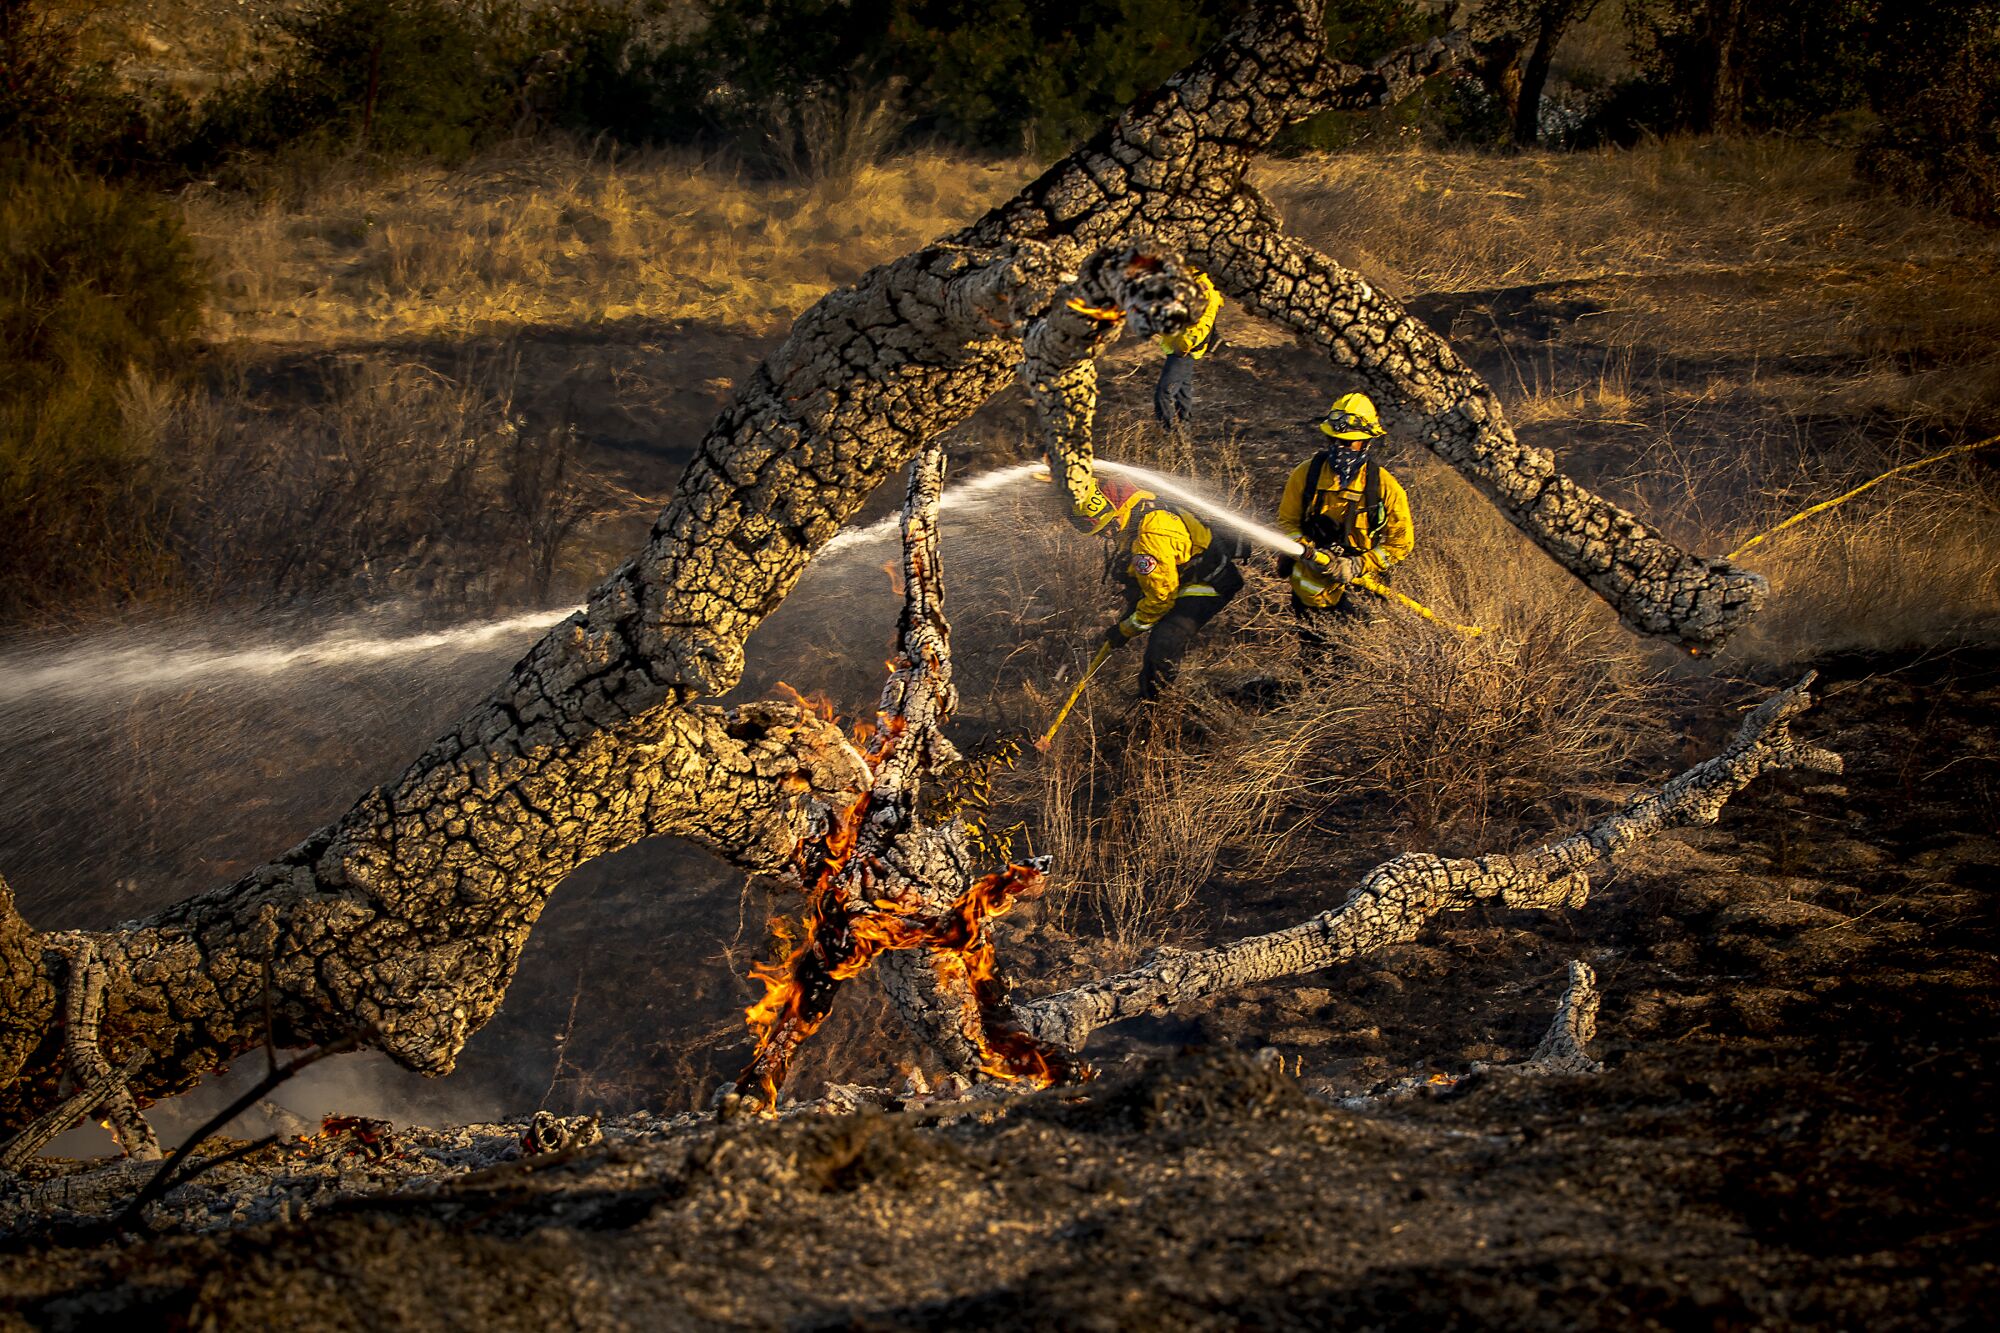 Flames burn on a charred, downed tree as firefighters in the background spray water and use hand tools